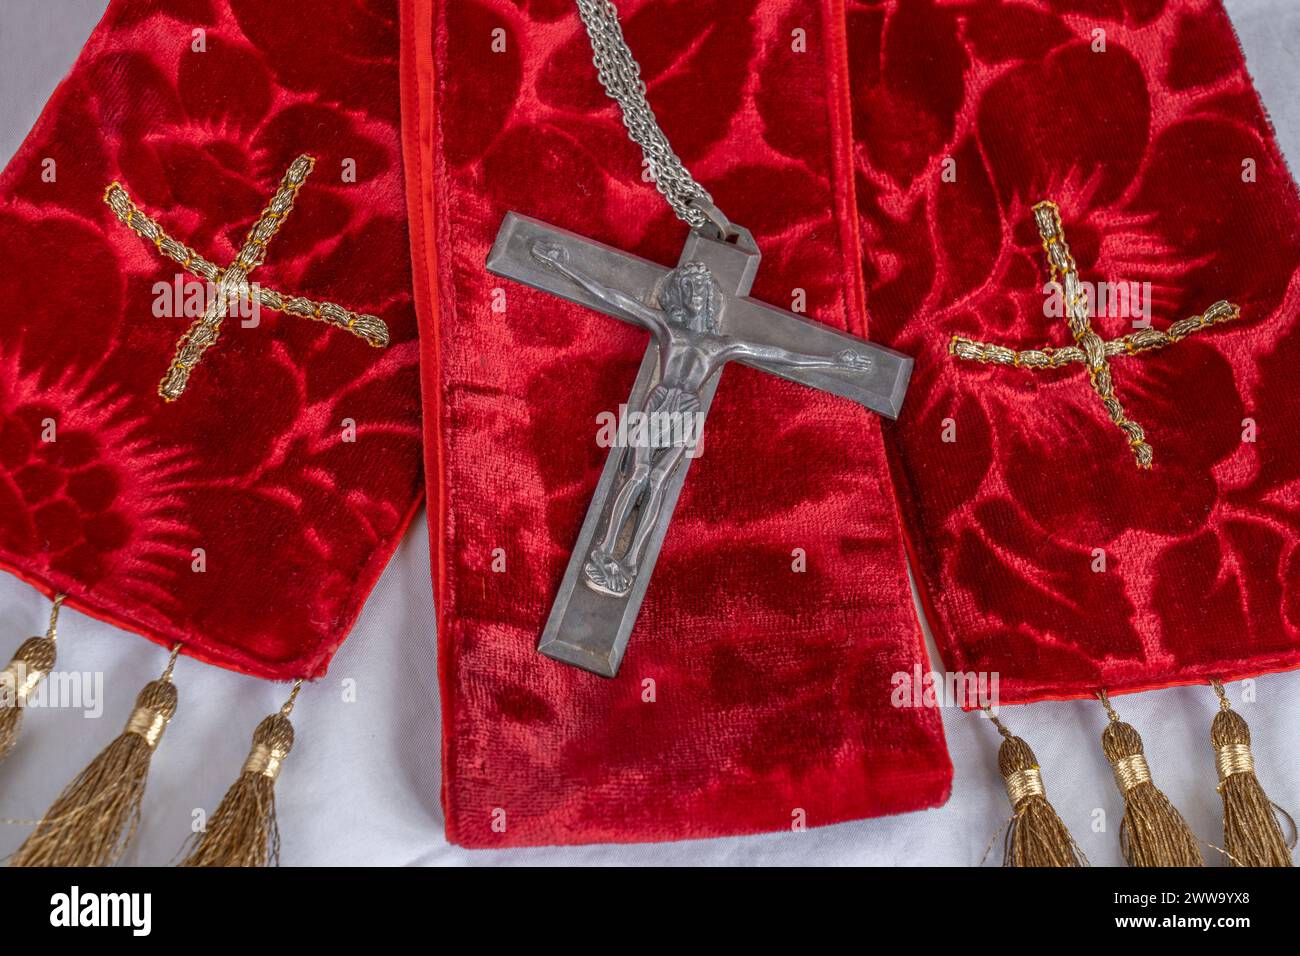 Closeup red vestments, stole, crucifix for Holy Week, Palm Sunday, Pentecost, Maundy Thursday, & church Easter Festivals with gold crosses. Stock Photo